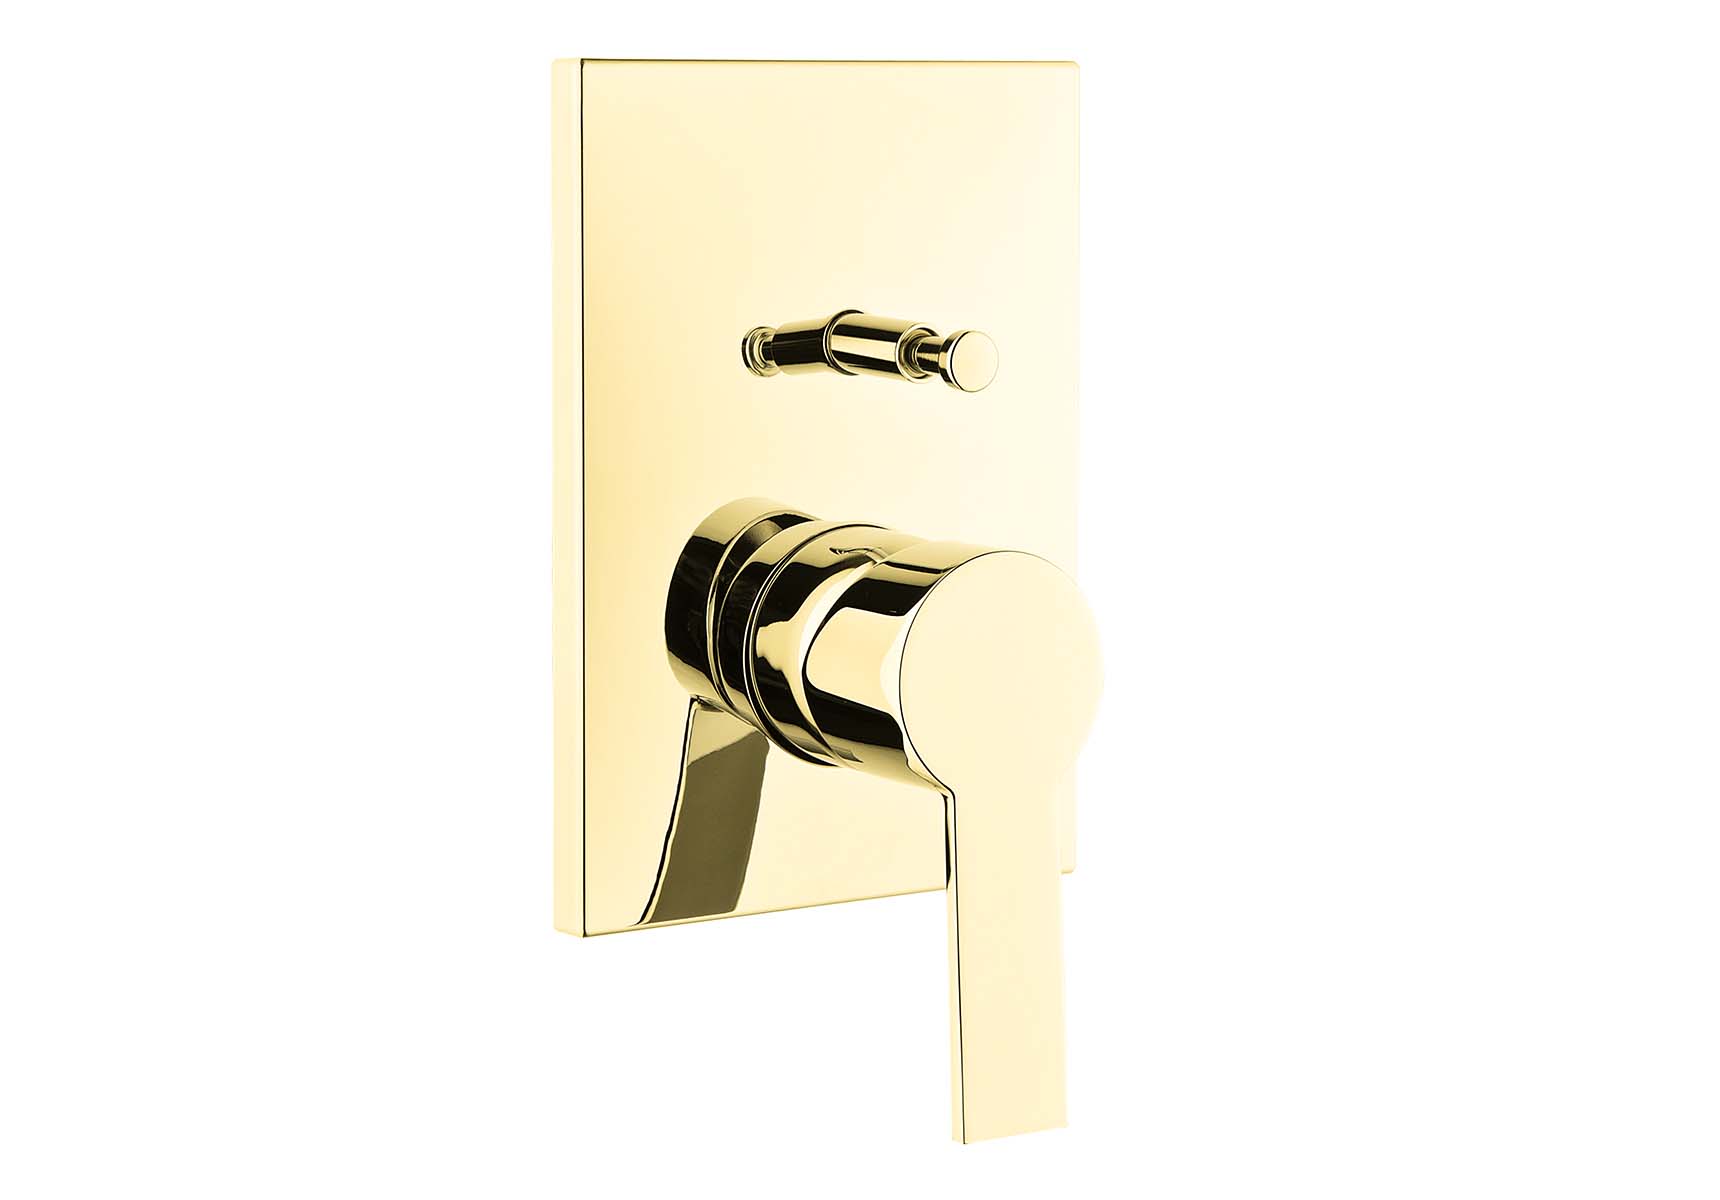 Flo S Built-In Bath/Shower Mixer , Exposed Part, Gold